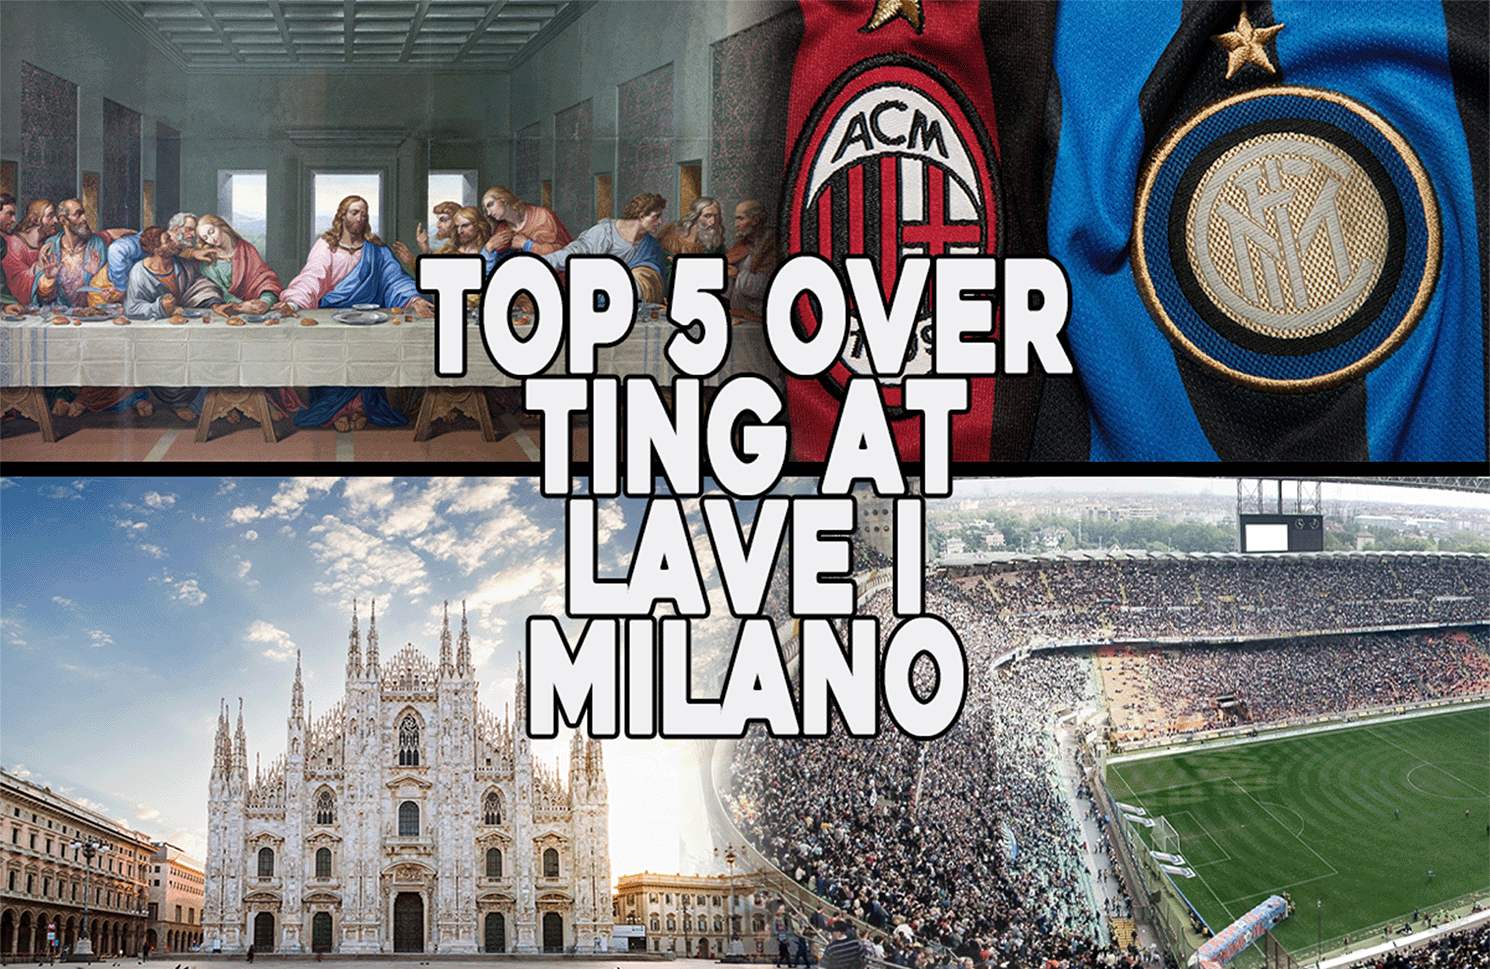 Top 5 over ting at lave i Milano